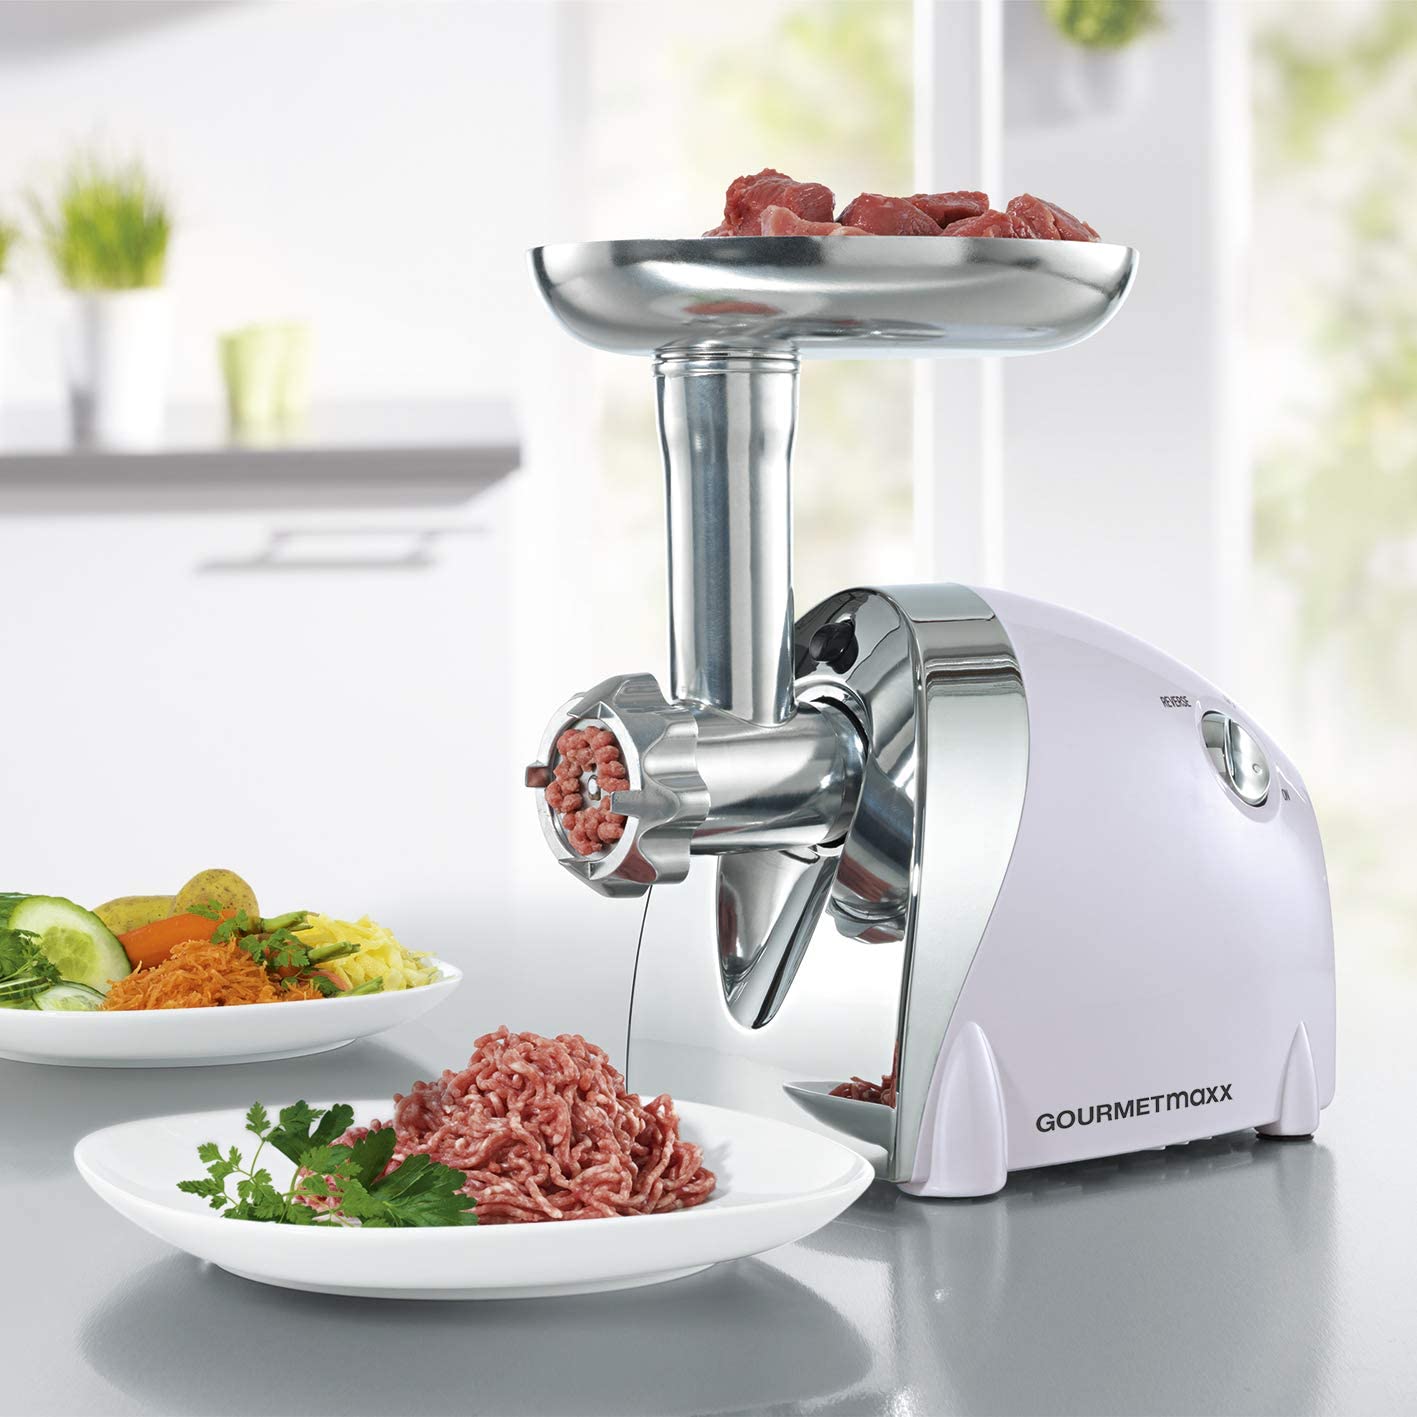 GOURMETmaxx Mincer and Küchenprofi 3-in-1 | 1,000 Watt Strong Meat Mincer for Raspping, Cutting, Chopping and Grating | 3 Chopping Inserts, 3 Cutting Inserts, Includes Pastry Attachment